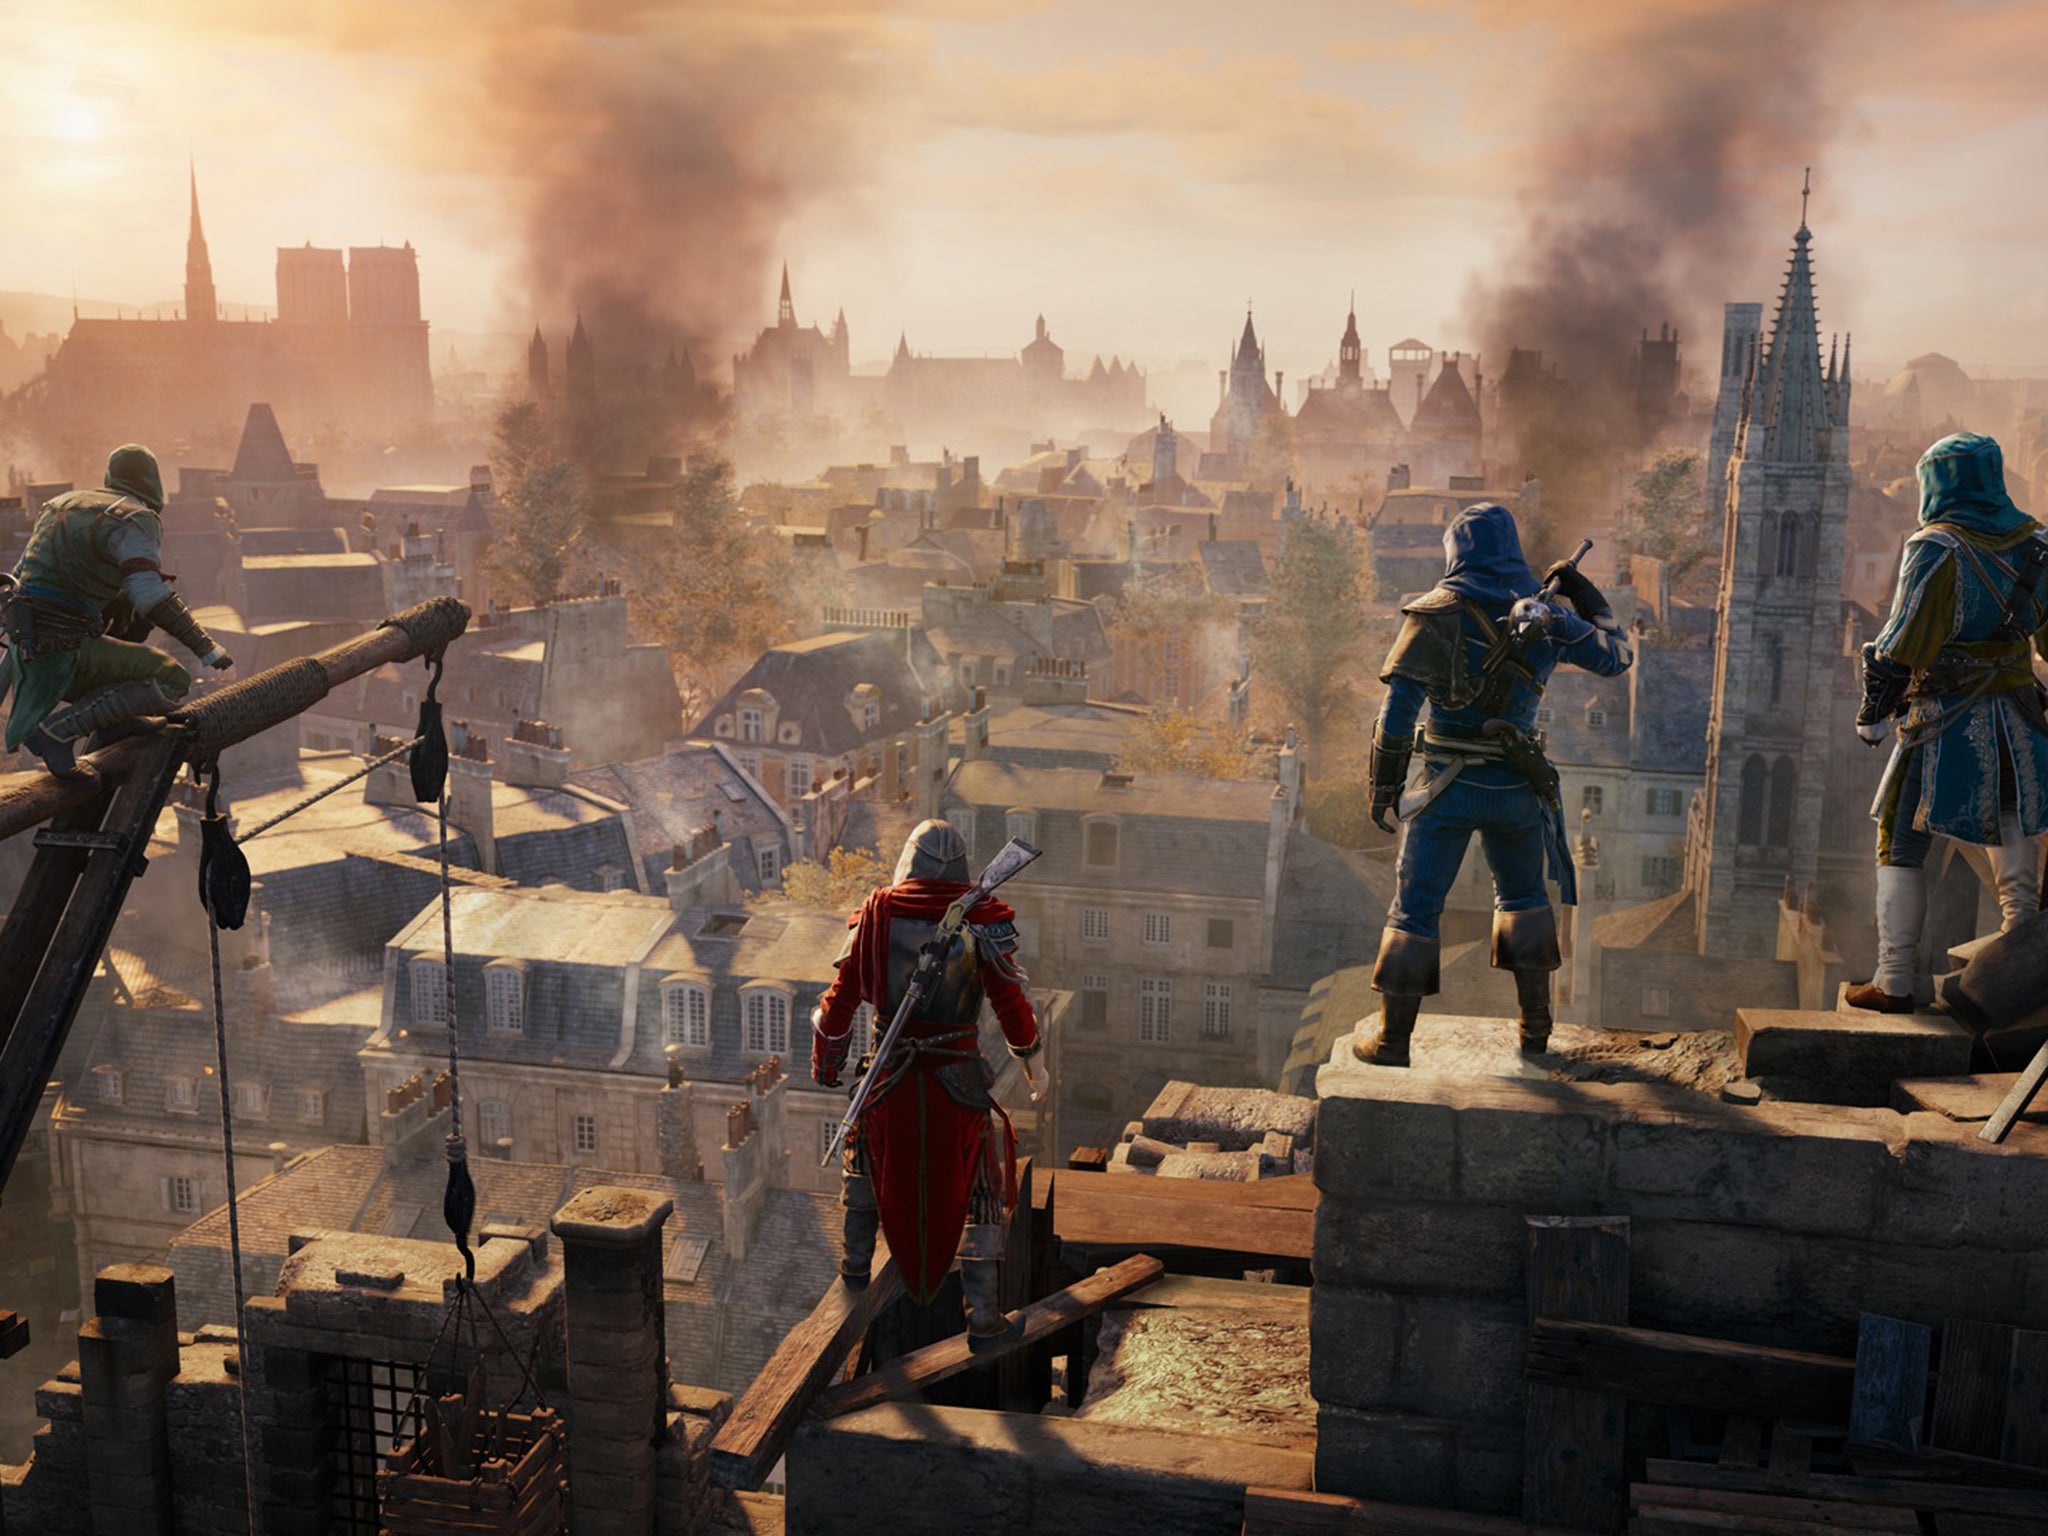  Assassin's Creed : UbiSoft: Video Games